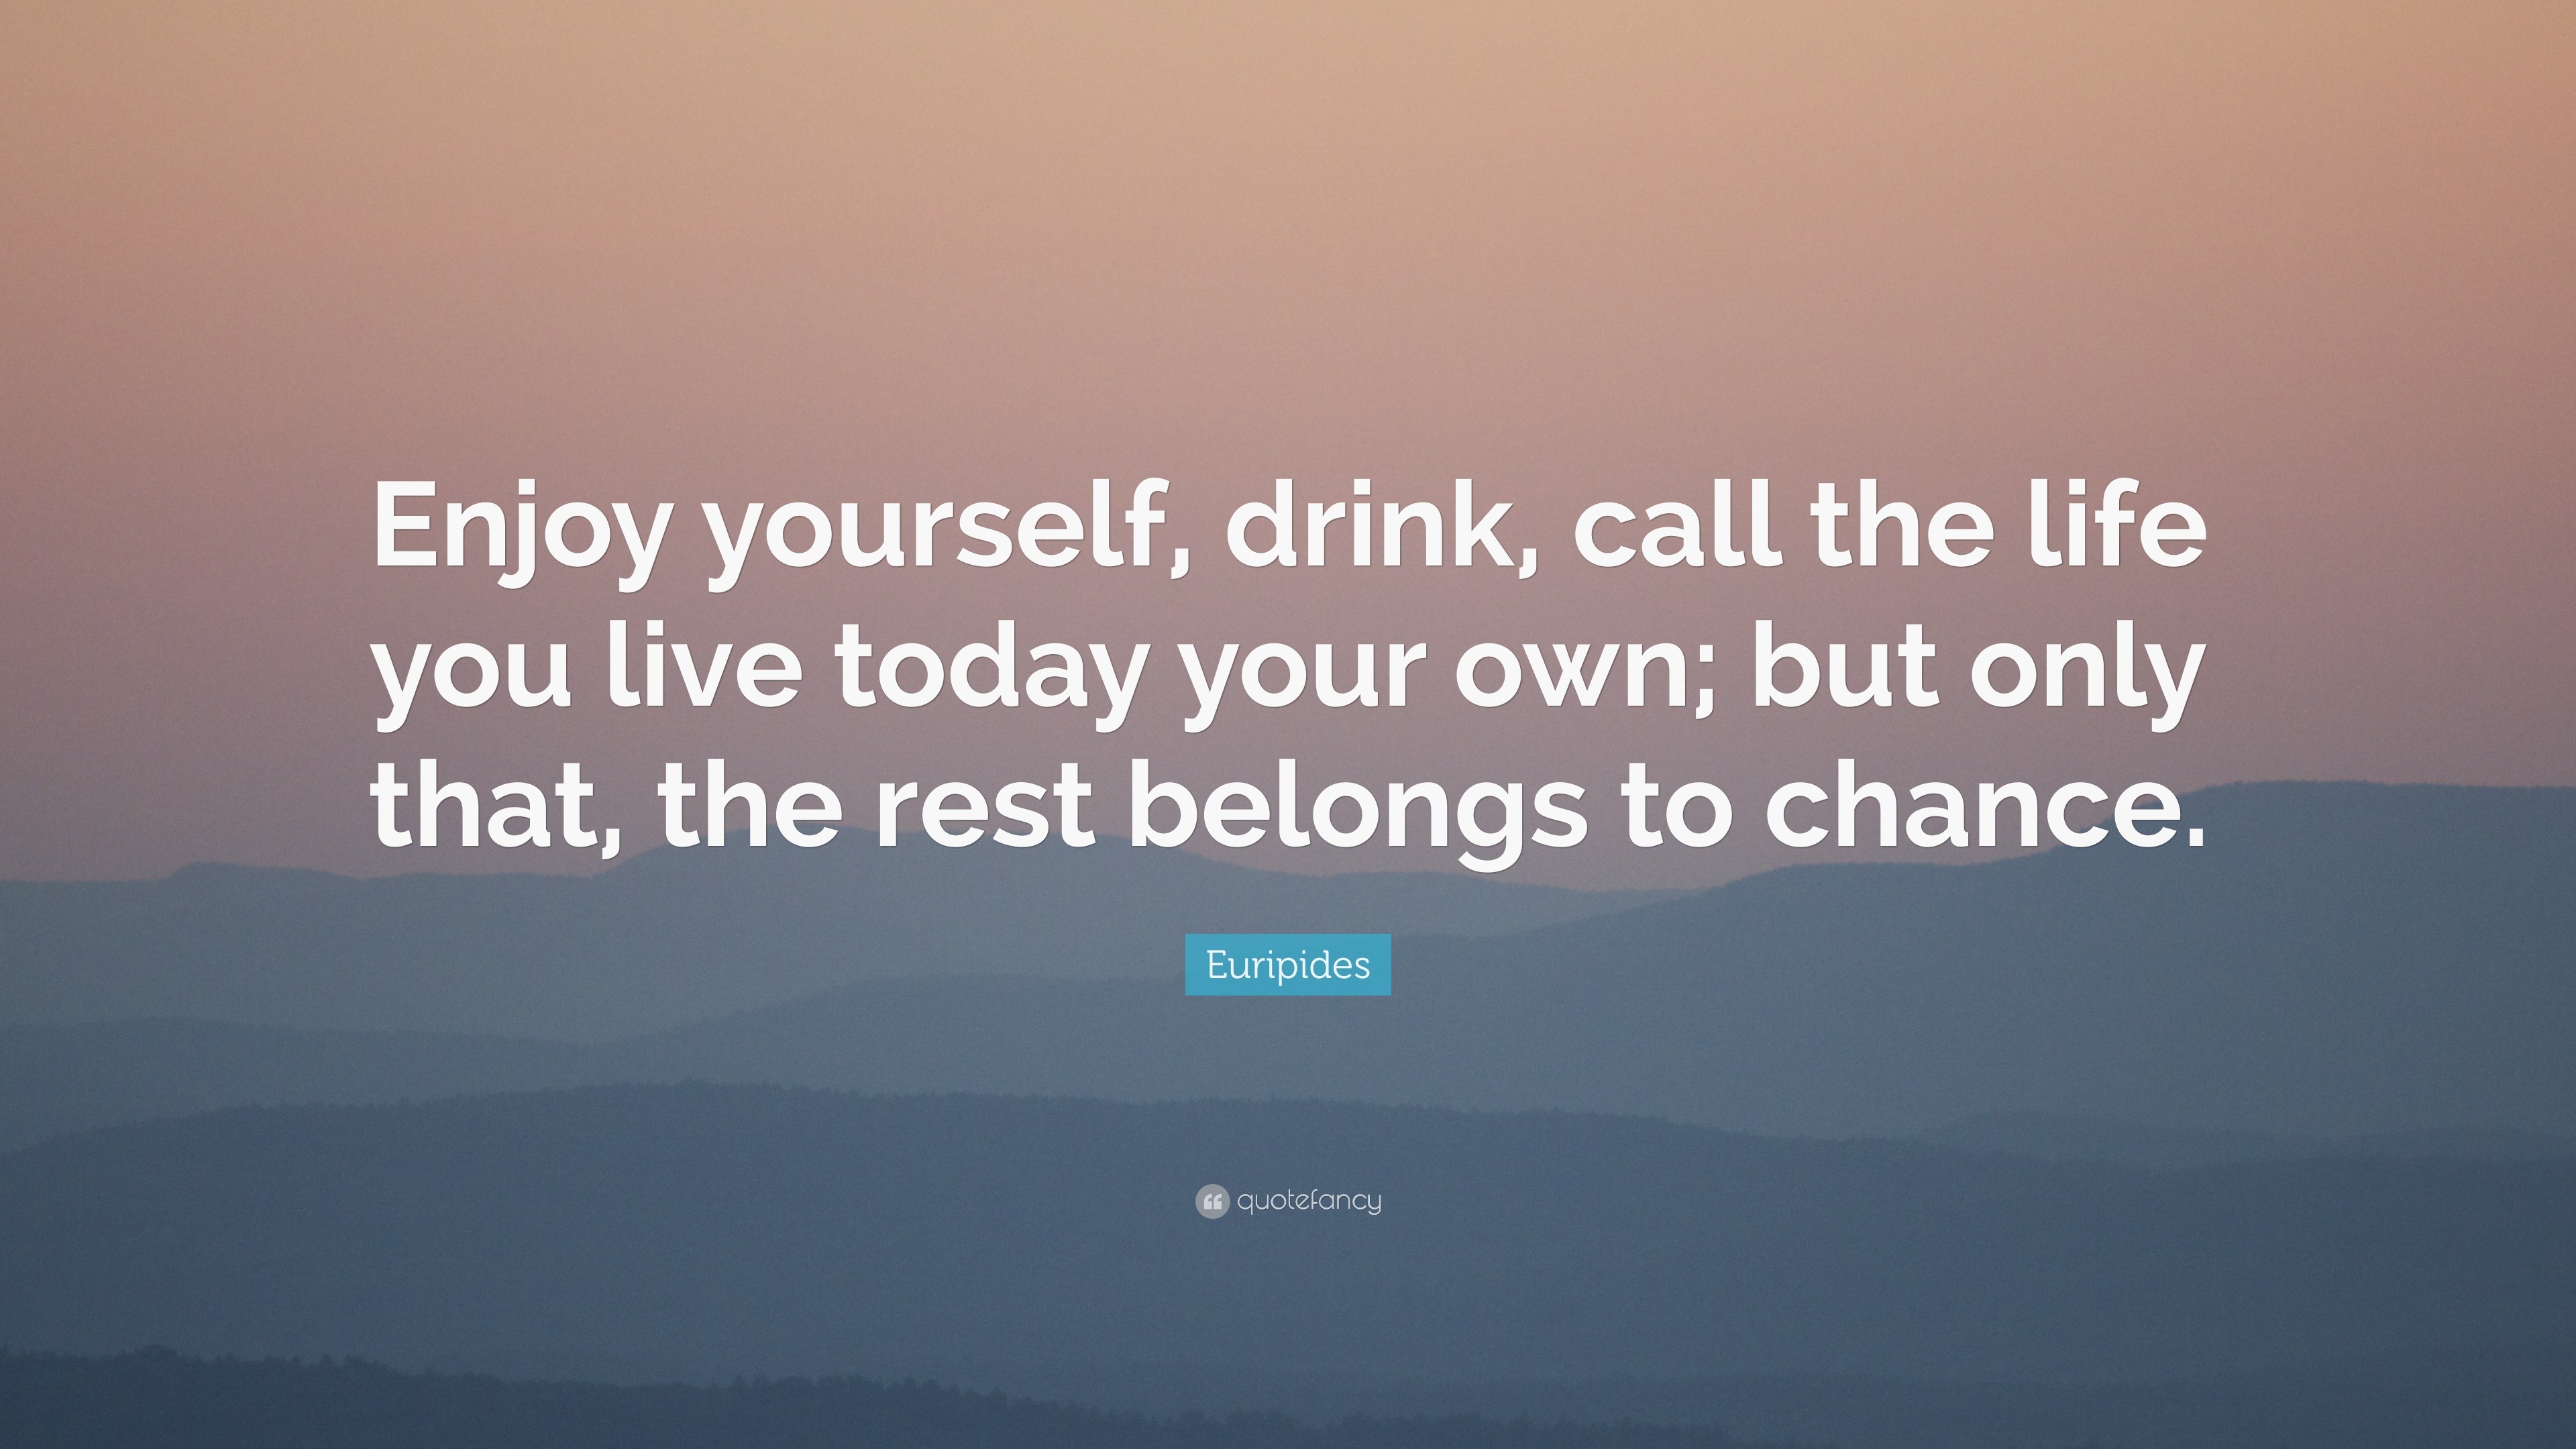 Euripides Quote “Enjoy yourself drink call the life you live today your